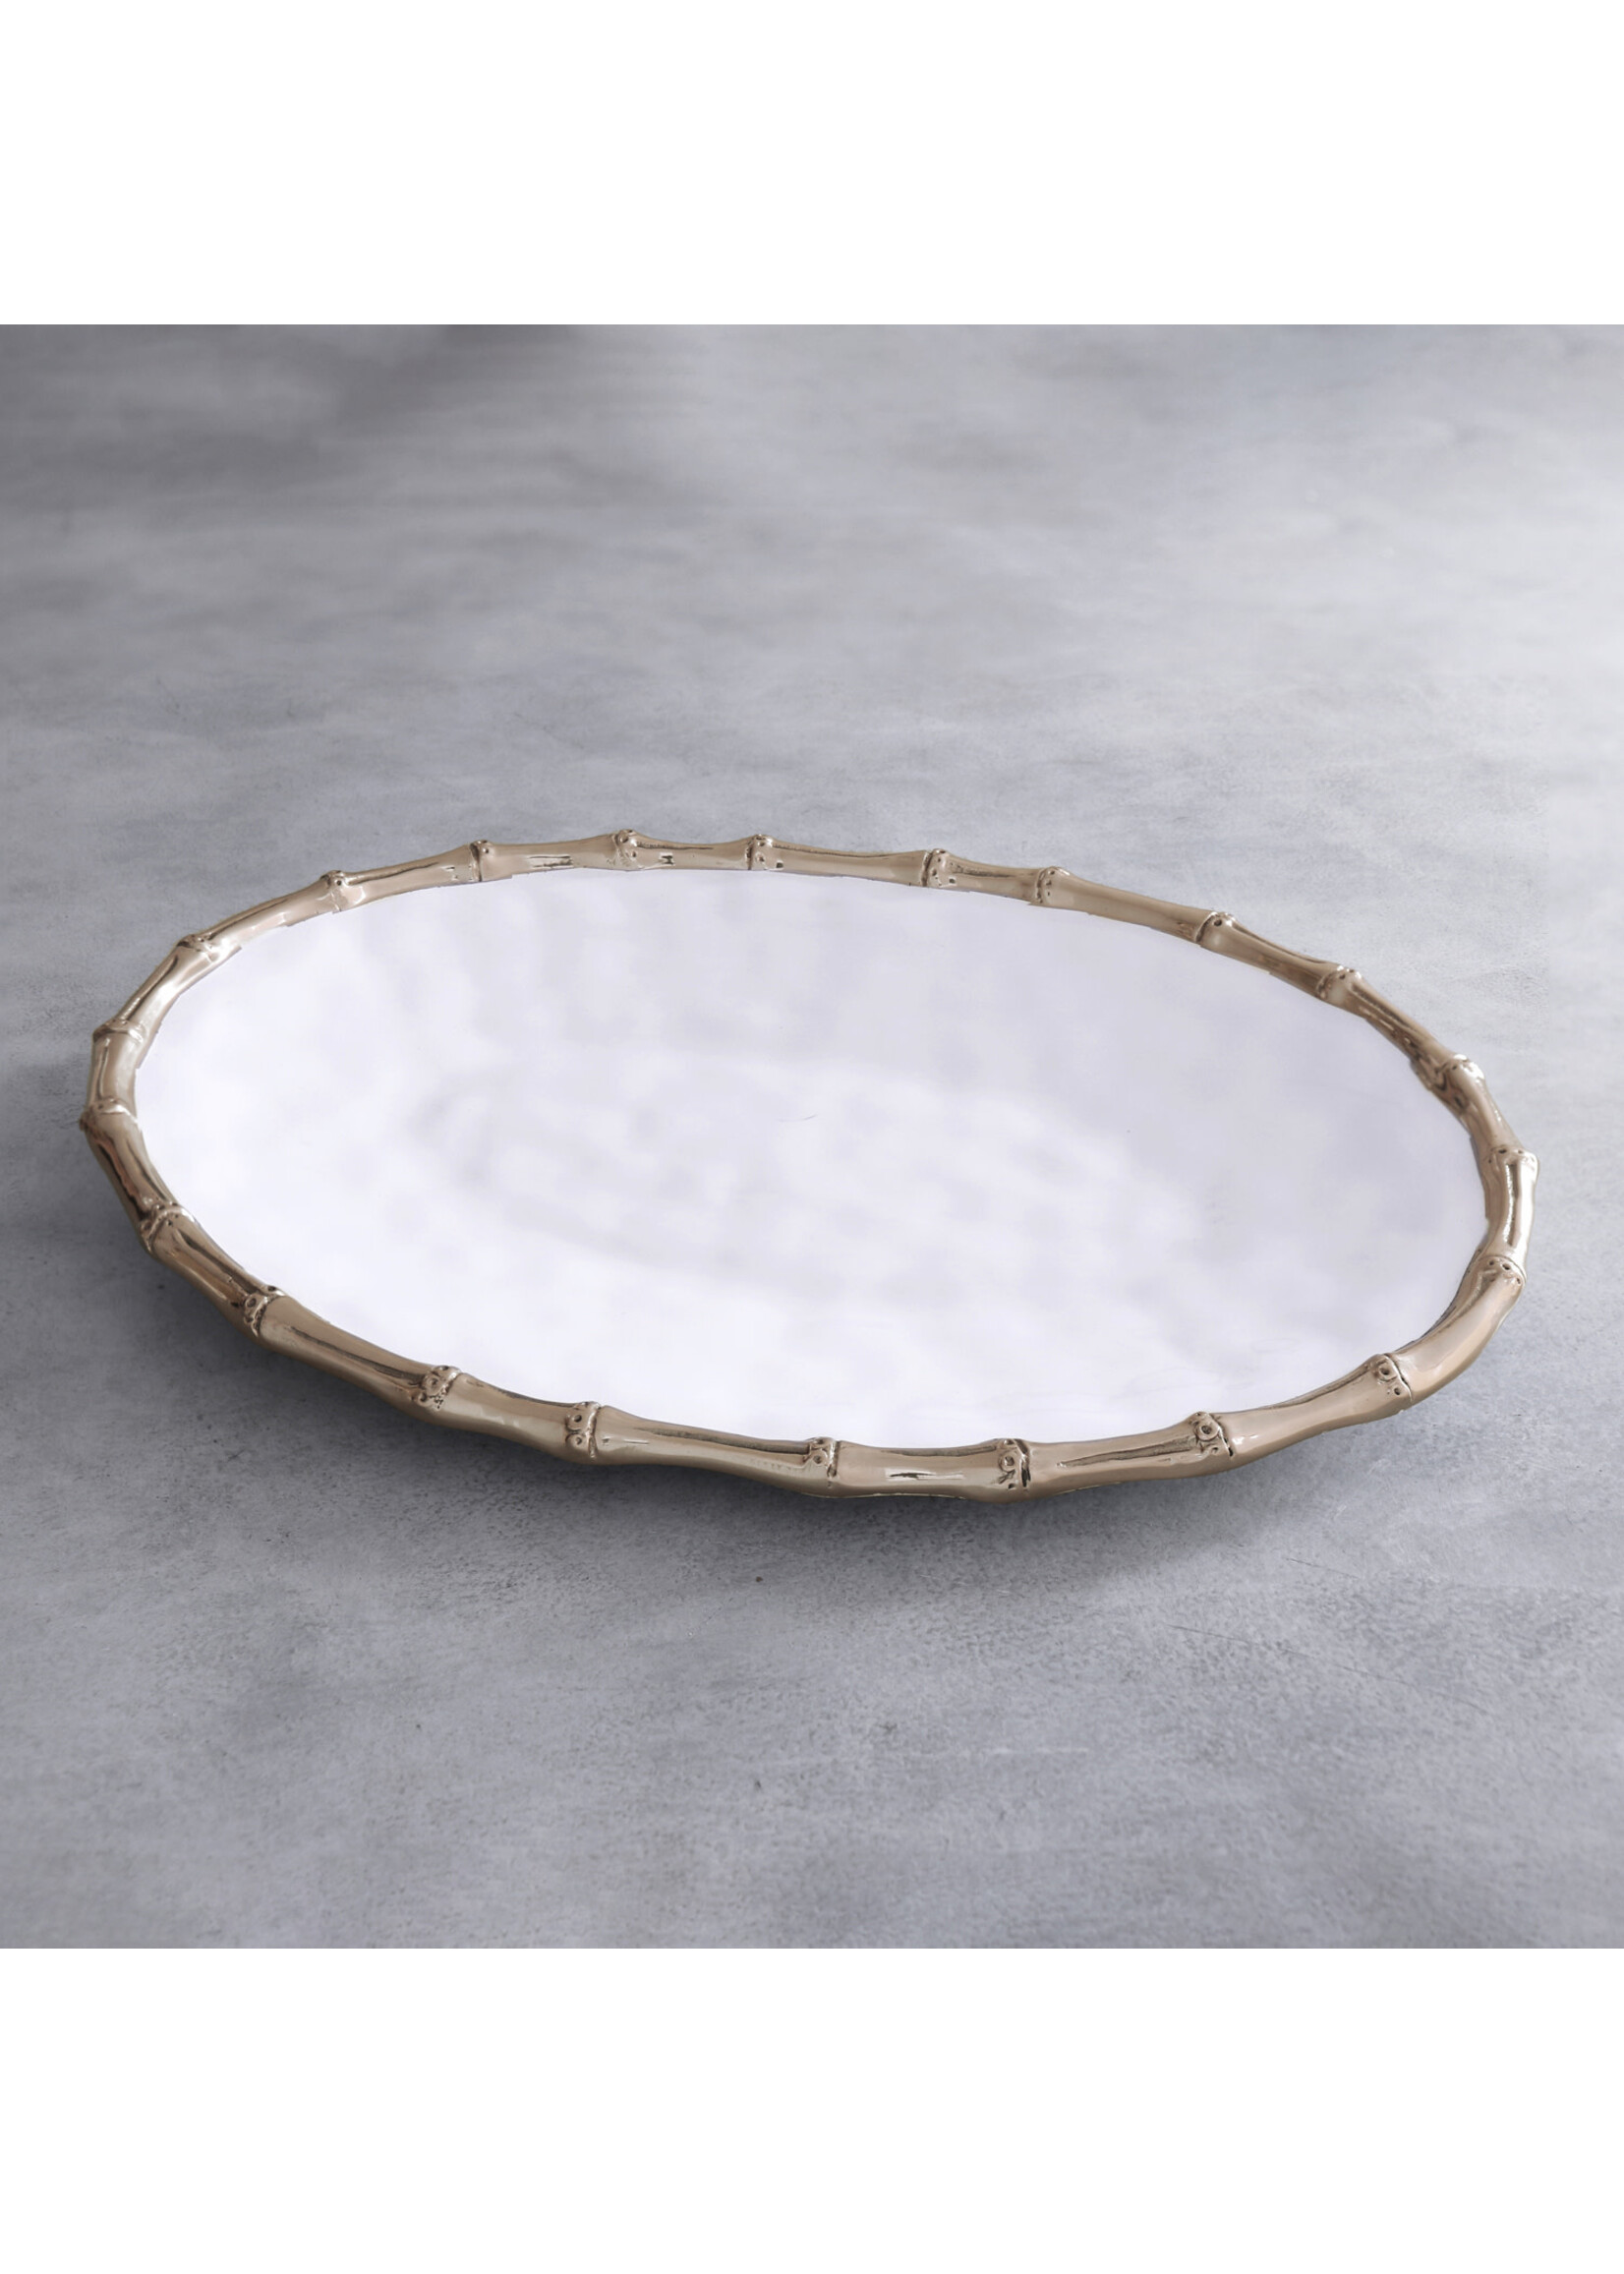 Beatriz Ball Thanni Bamboo Large Oval Platter, White and Gold